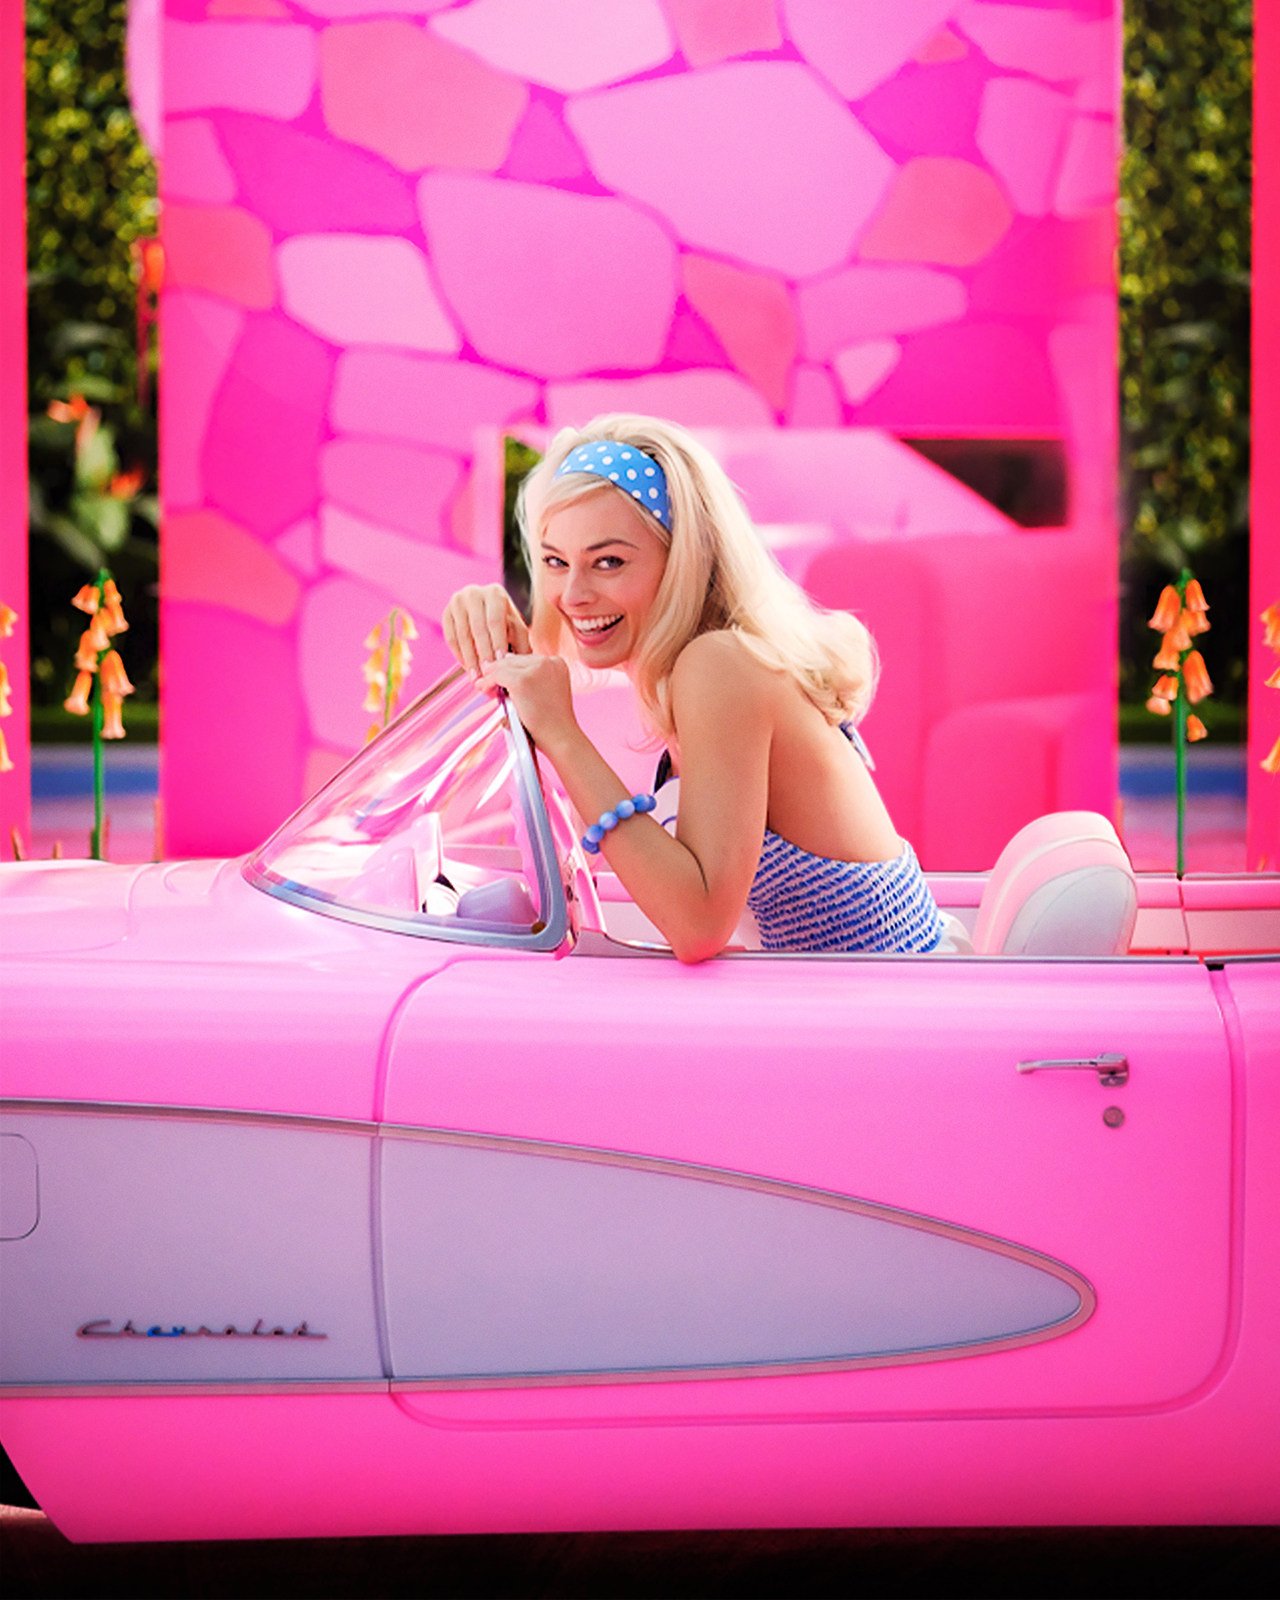 Hollywood’s output in 2023 includes the Barbie movie, with Margot Robbie (above) in the title role, as well as more from Tom Cruise and Timothée Chalamet. Photo: Warner Bros. Pictures/TNS